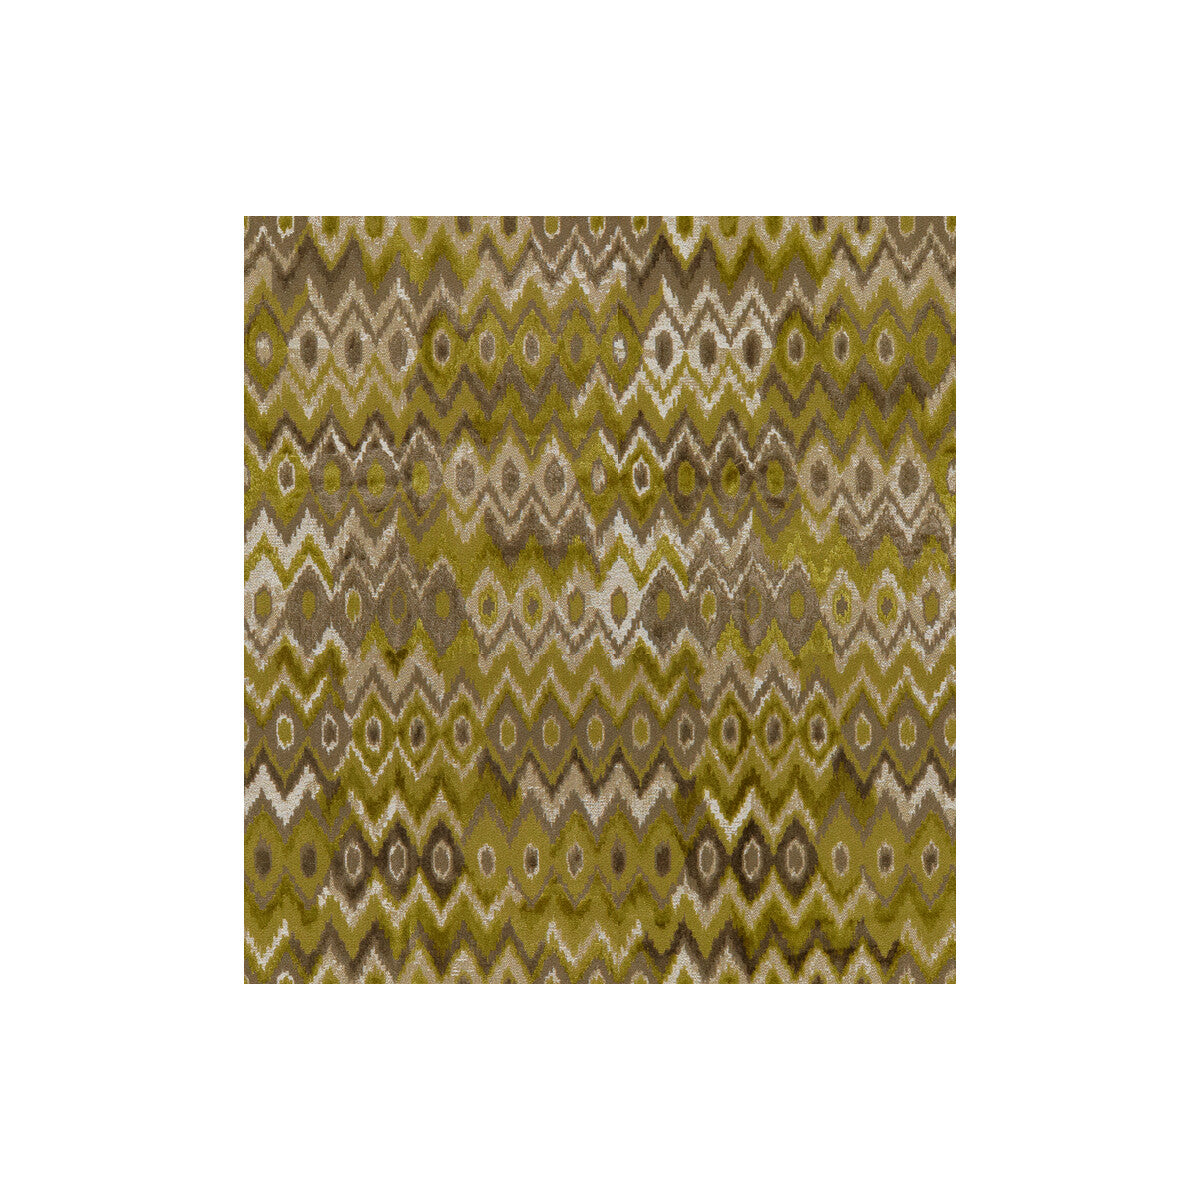 Modern Contrast fabric in quince color - pattern 32103.316.0 - by Kravet Couture in the Modern Colors II collection